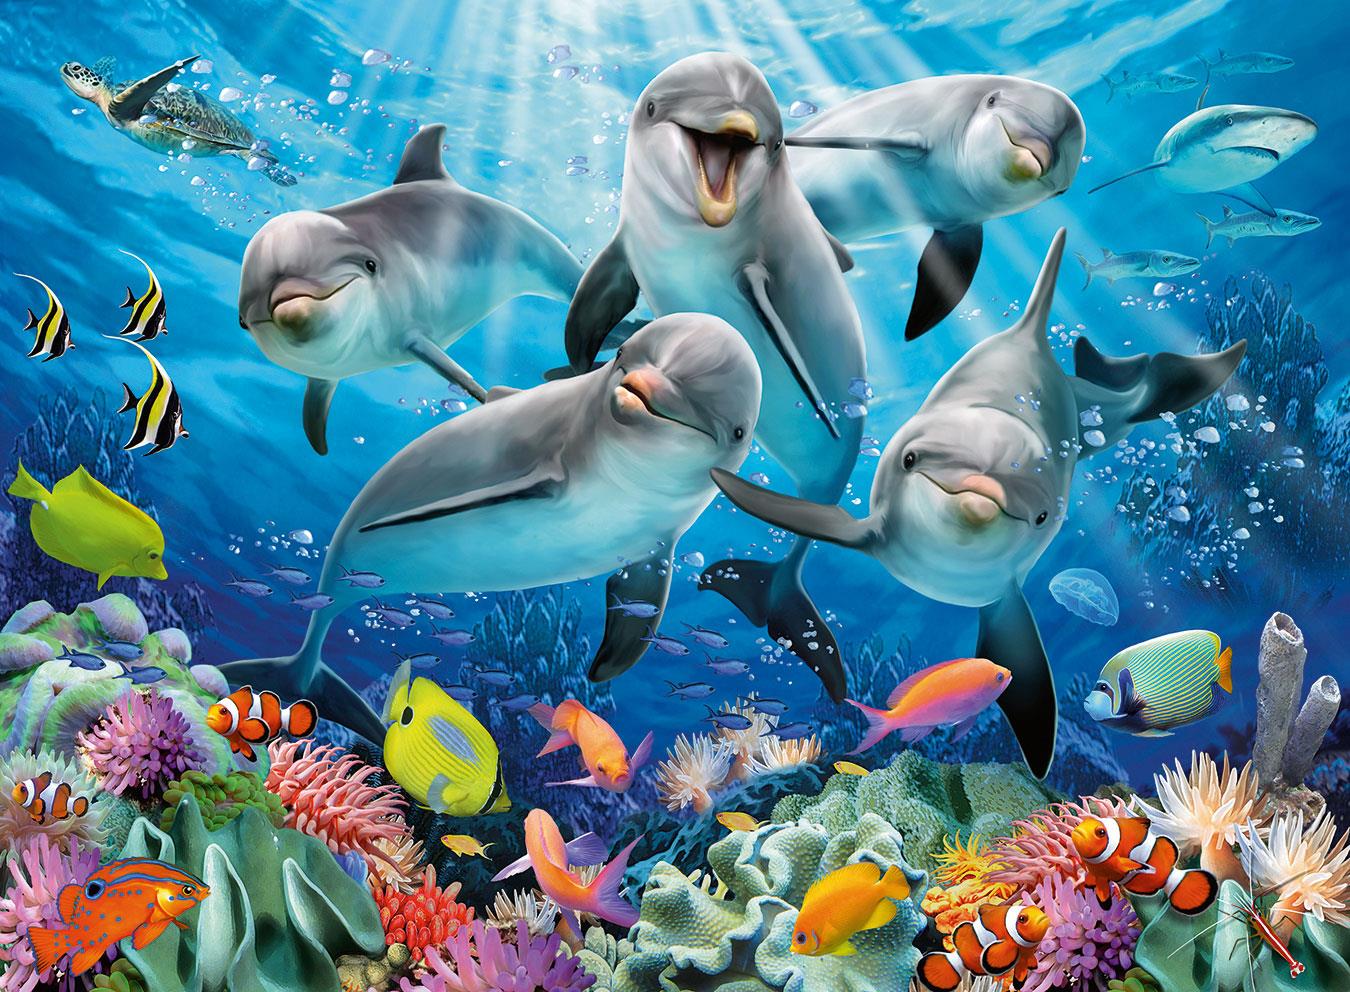 Ravensburger Dolphins Jigsaw Puzzle (500 Pieces) – PDK